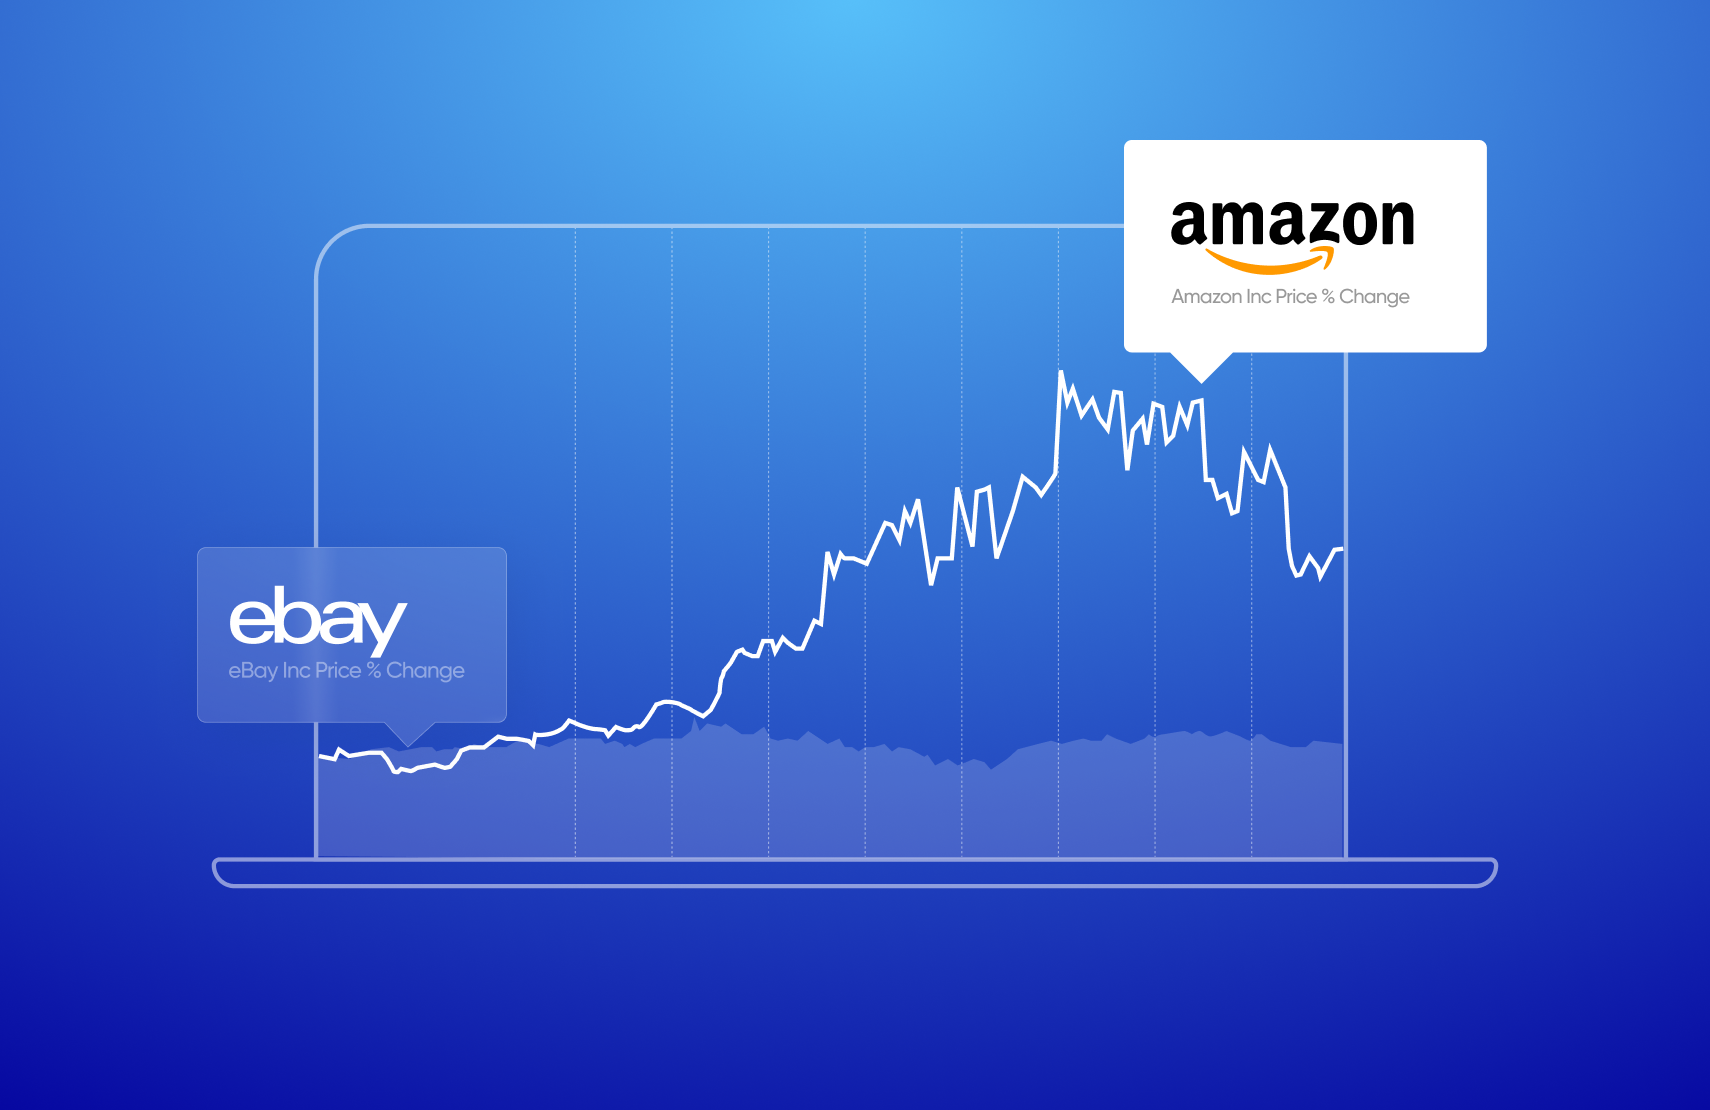 Why Did Amazon Grow Faster Than eBay?